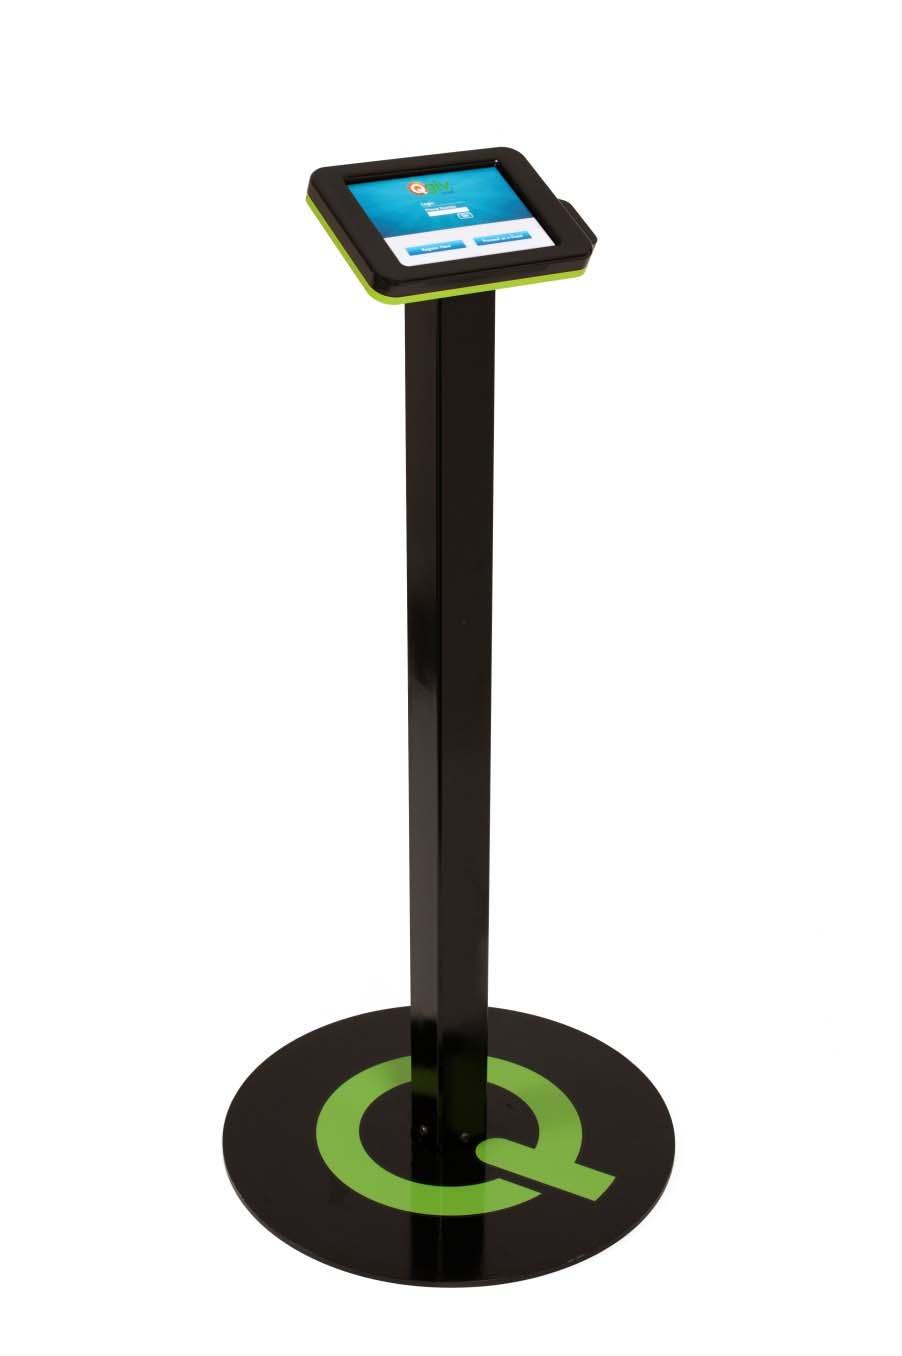 E-Giving Giving Kiosk plus the standard charges